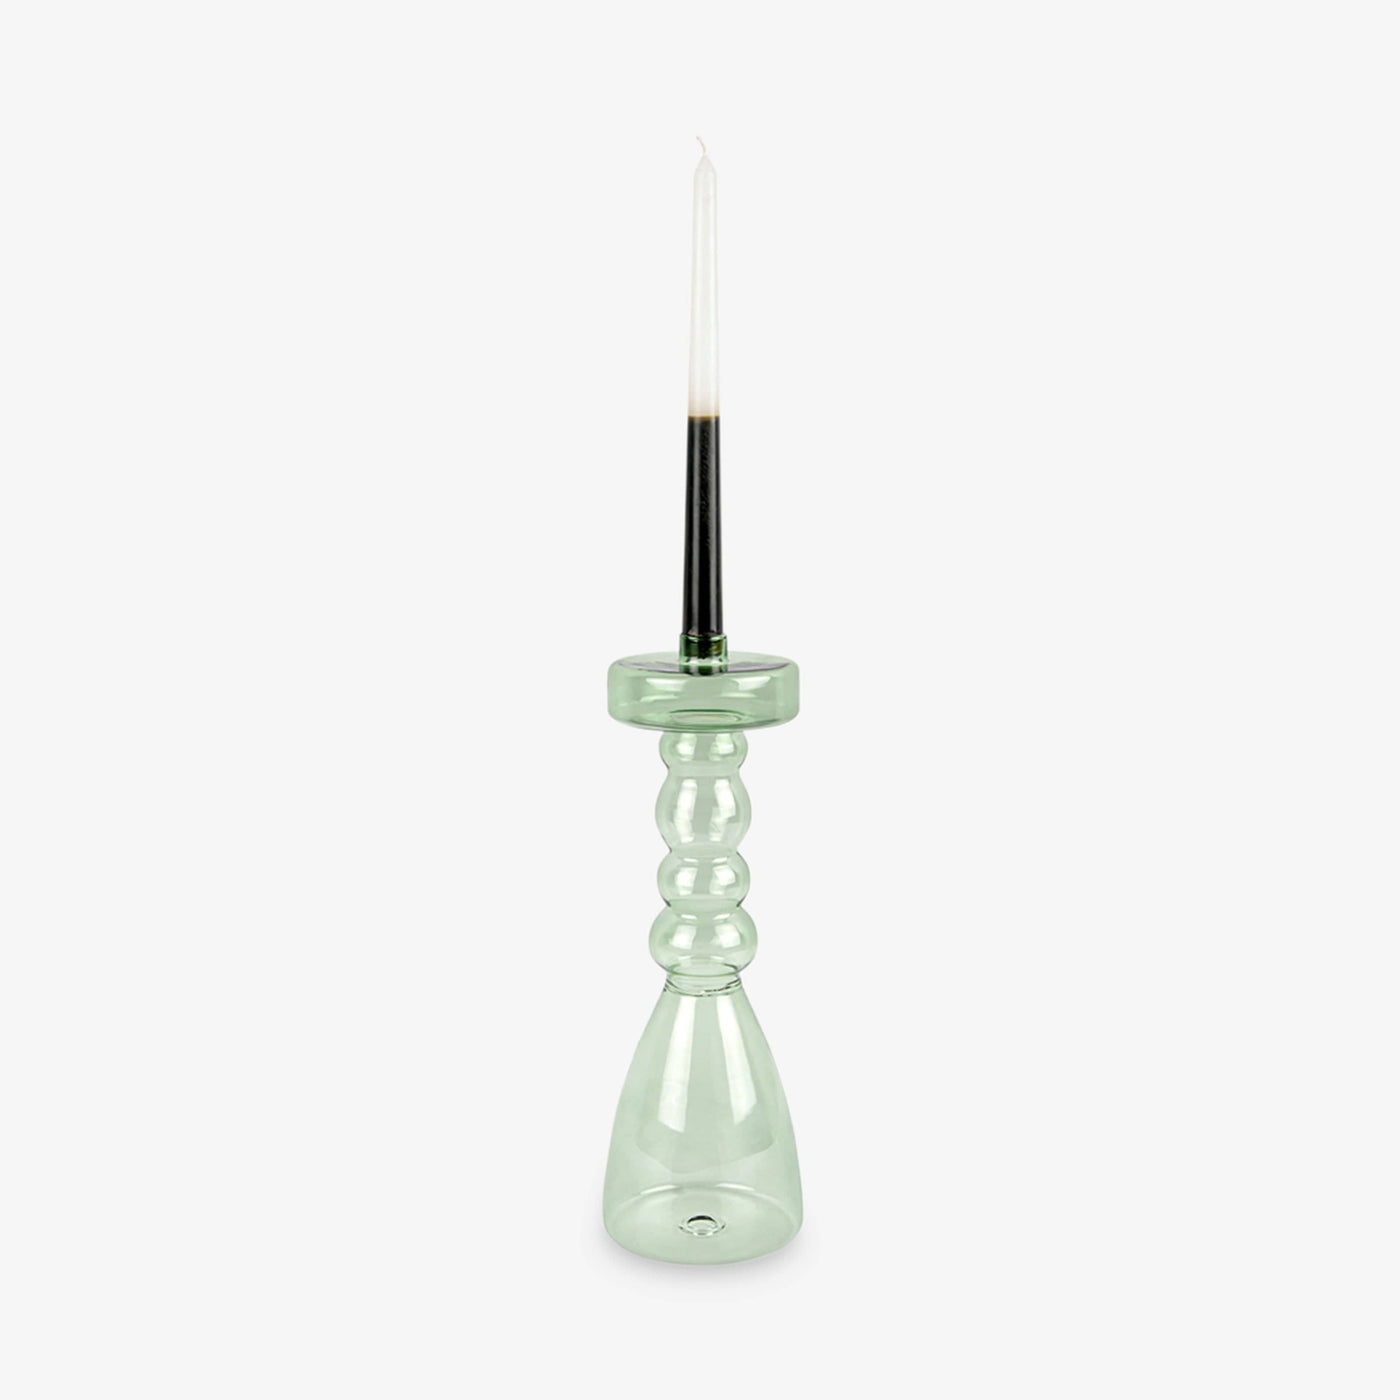 Ludou Candle Holder, Glass, Jungle Green, L Candle Holders sazy.com